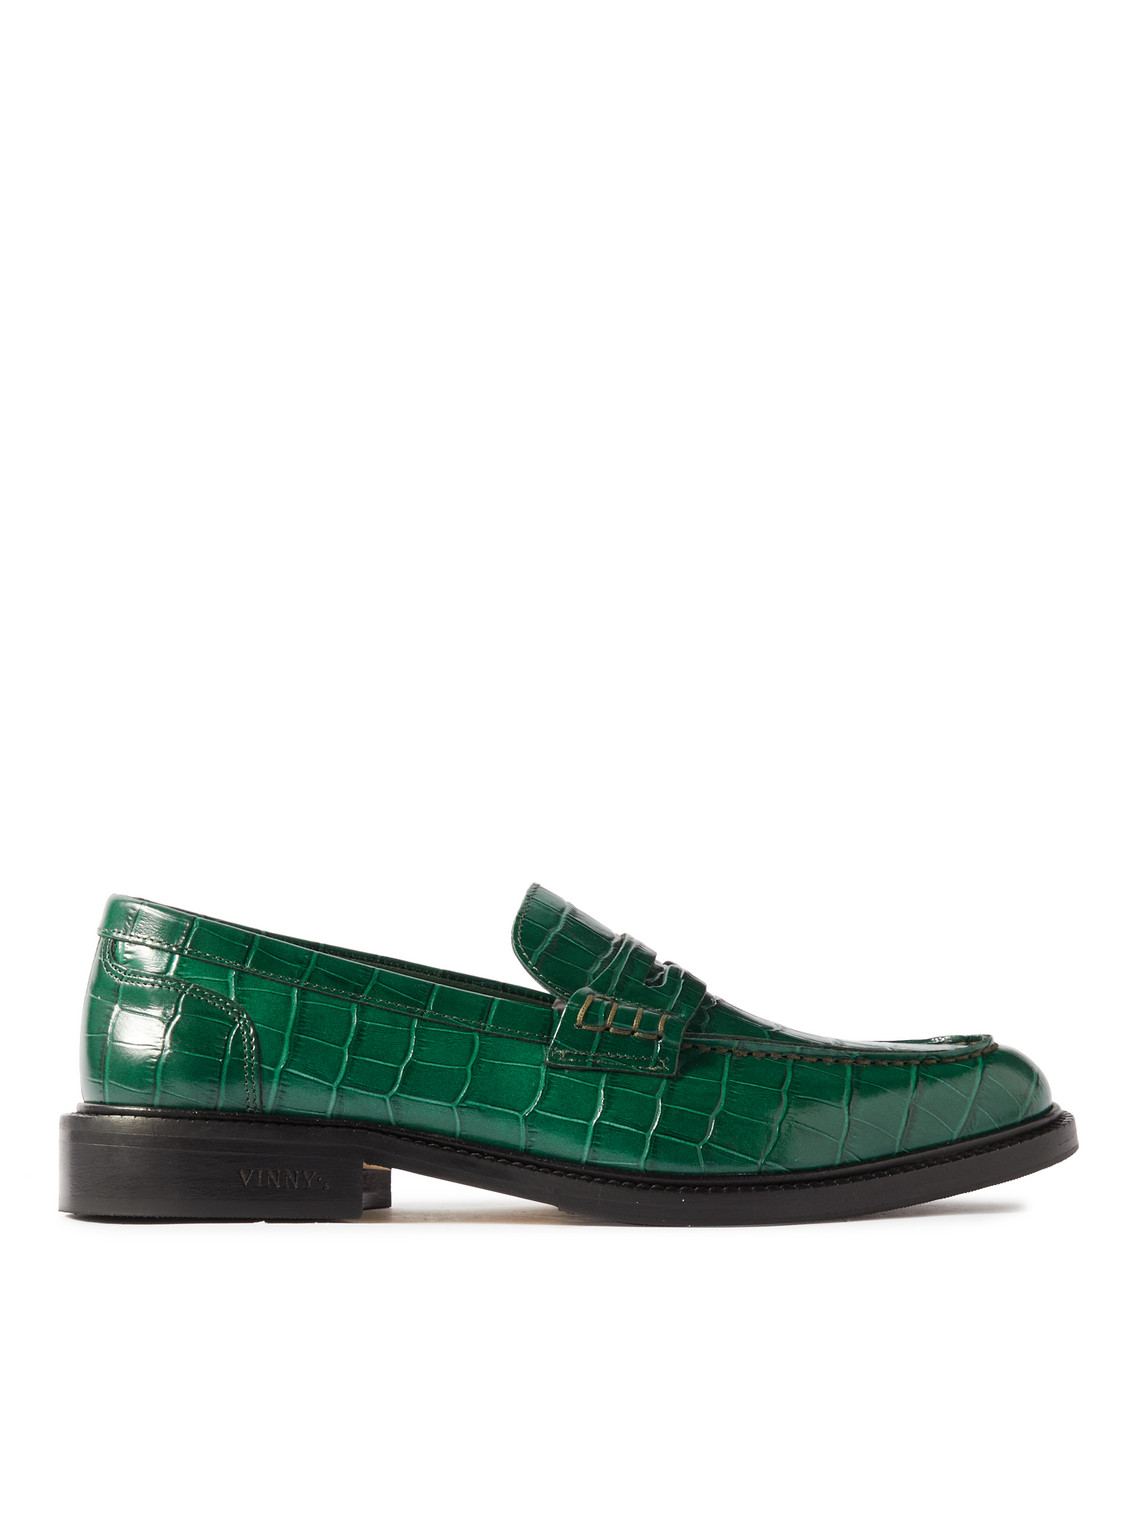 VINNY'S TOWNEE CROC-EFFECT LEATHER PENNY LOAFERS